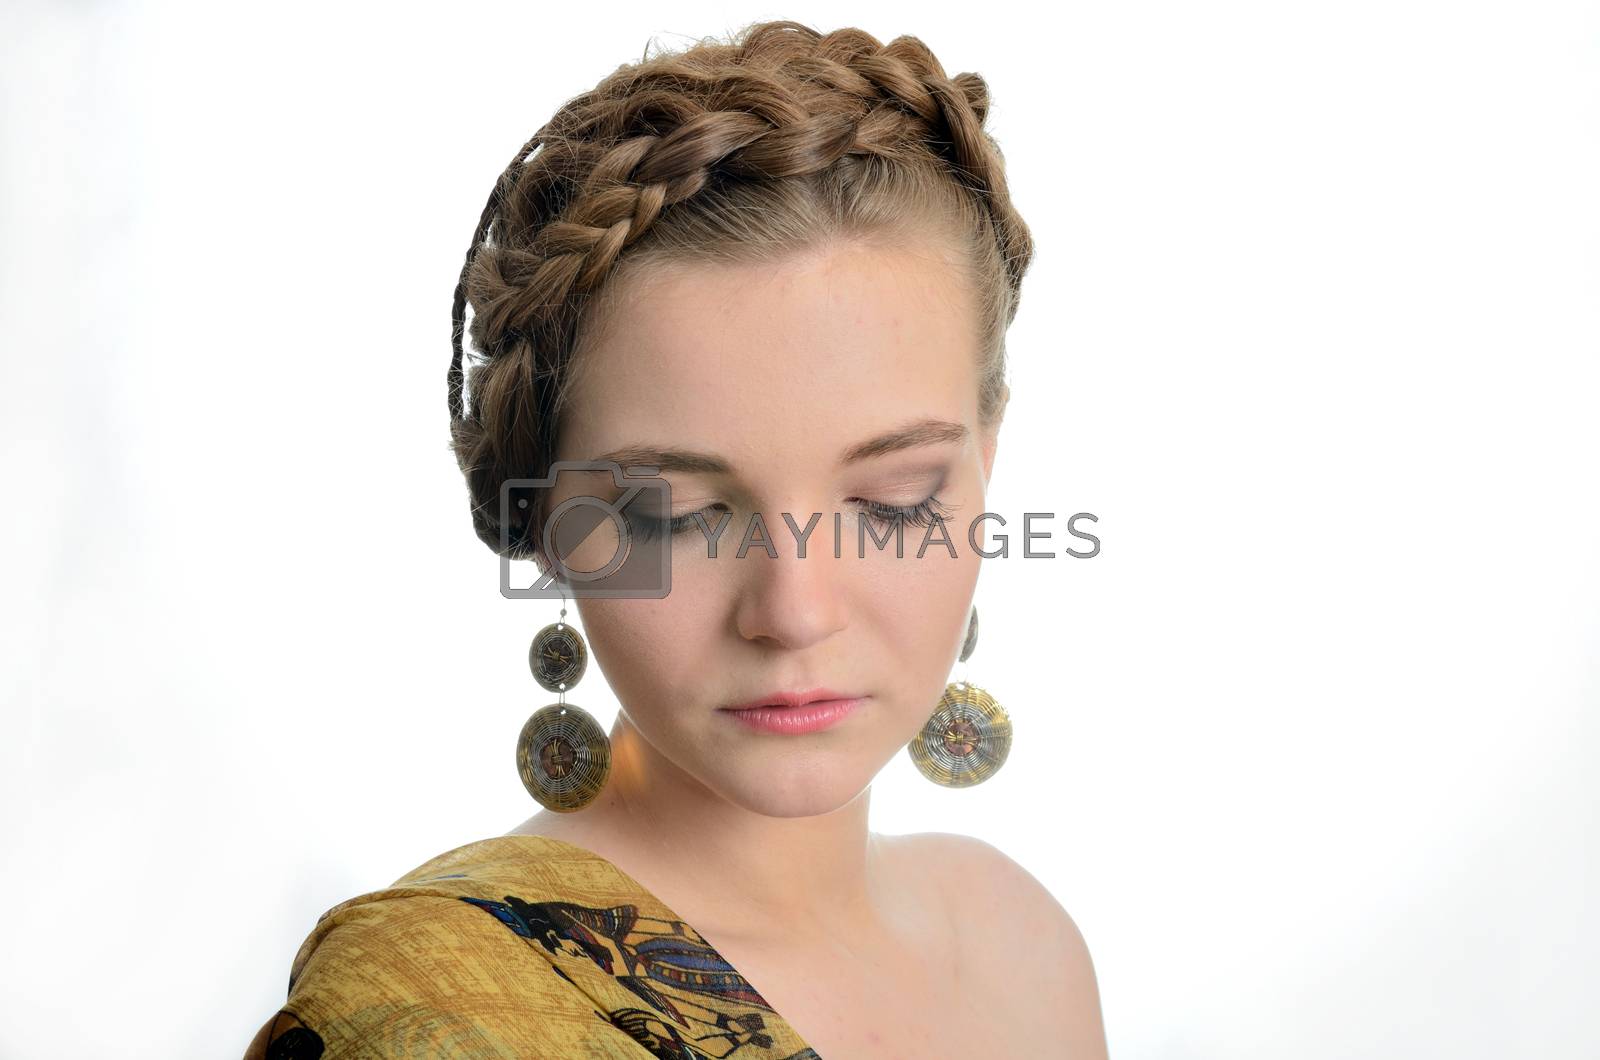 Royalty free image of Girl with earrings by bartekchiny